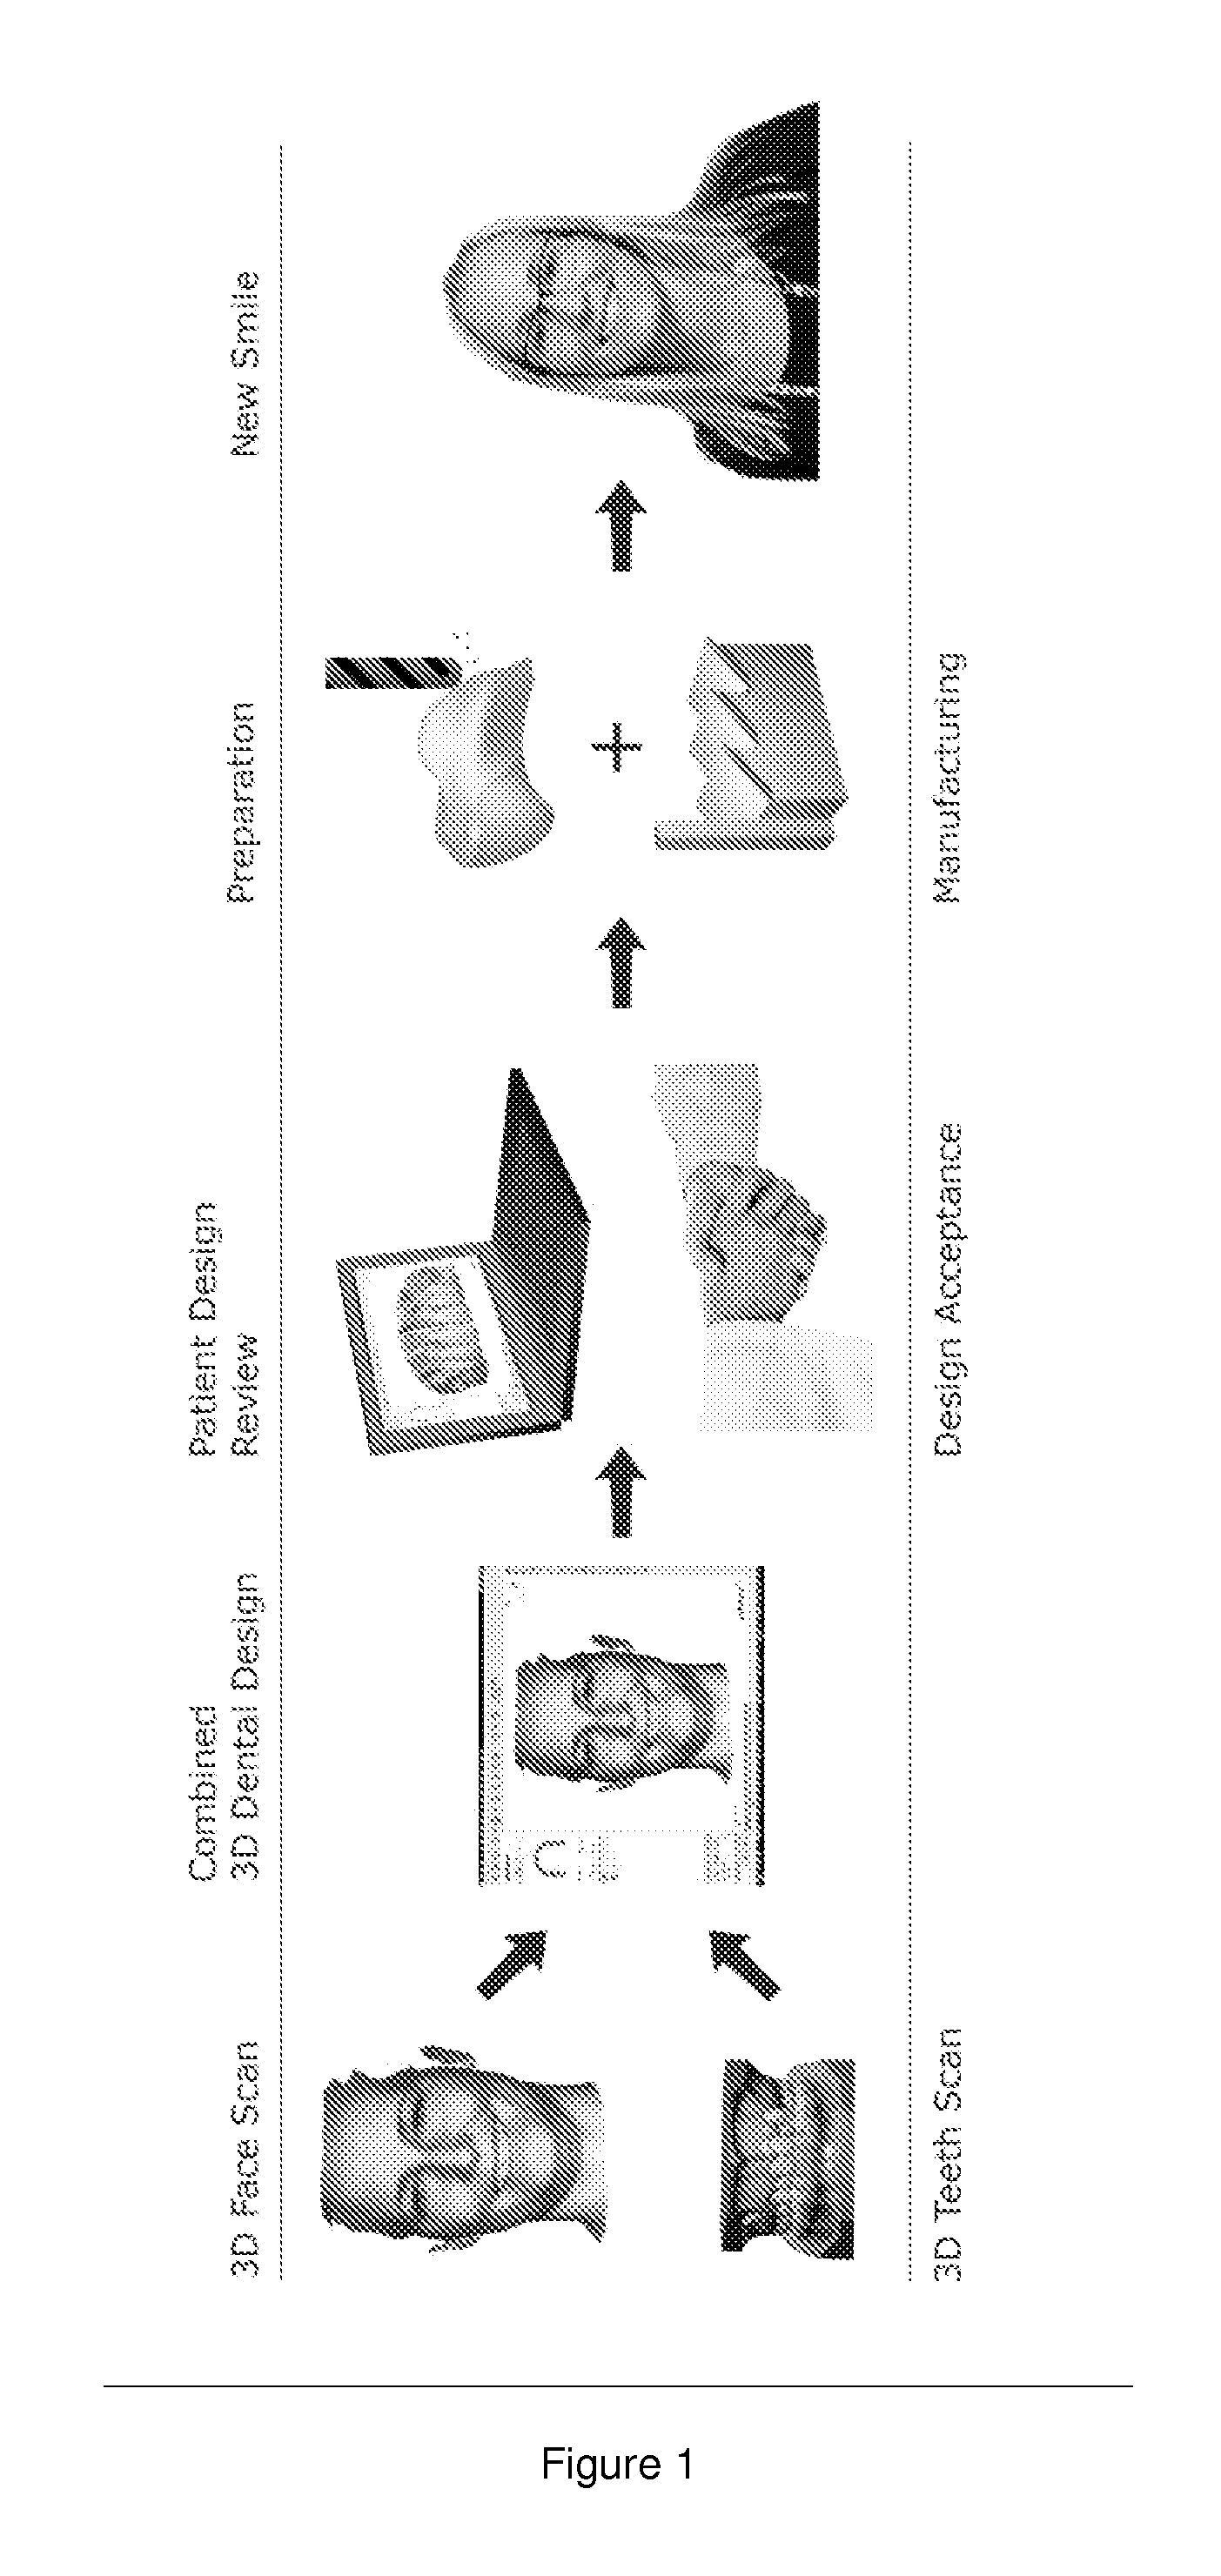 System and method for effective planning, visualization, and optimization of dental restorations